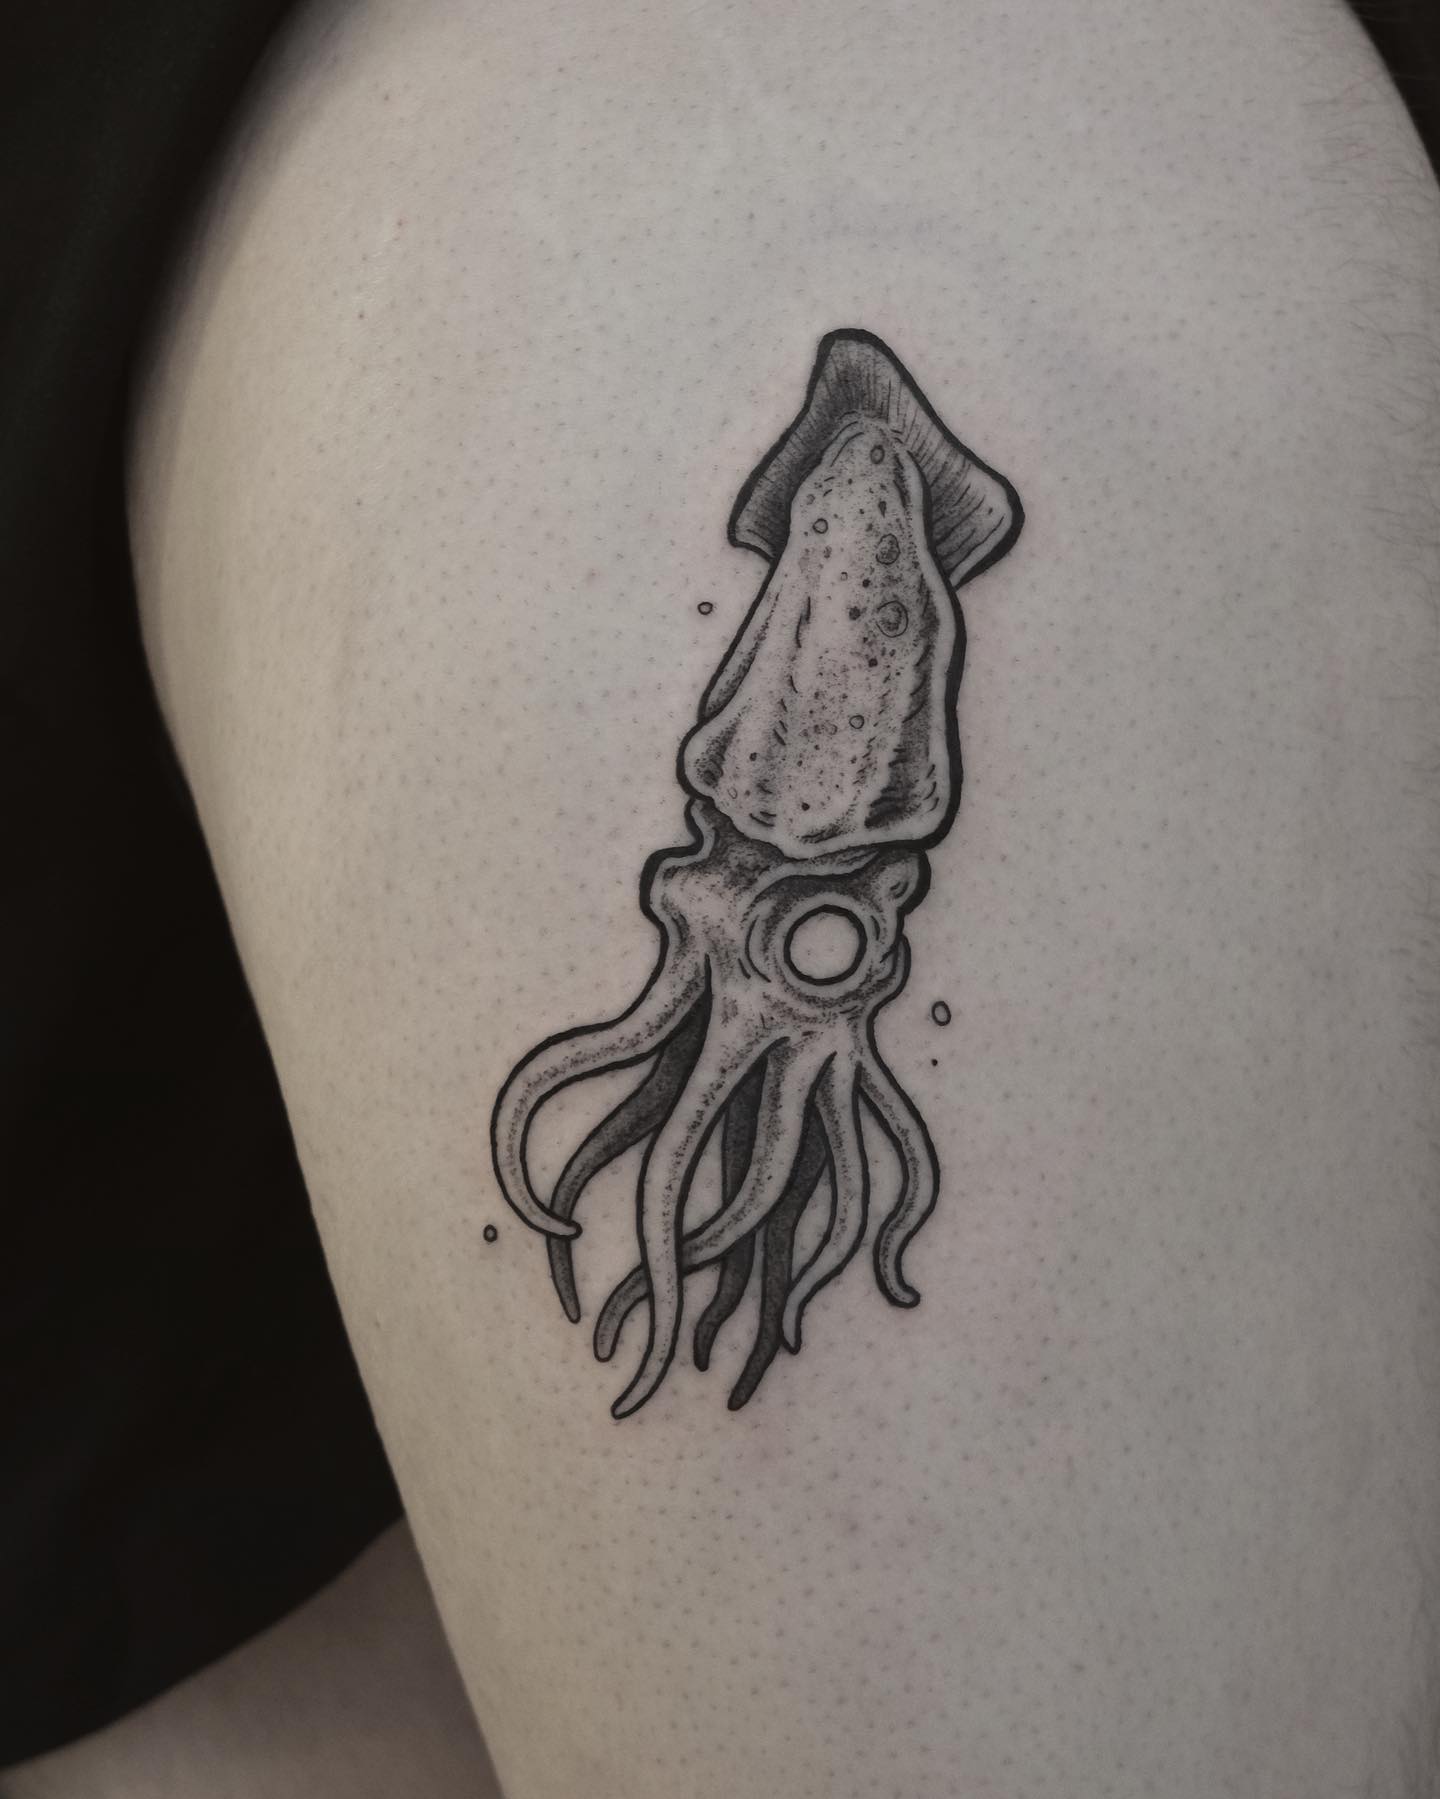 Having a detailed squid tattoo will be a good choice if you like aquatic animals. You may go for a squid like the one above.